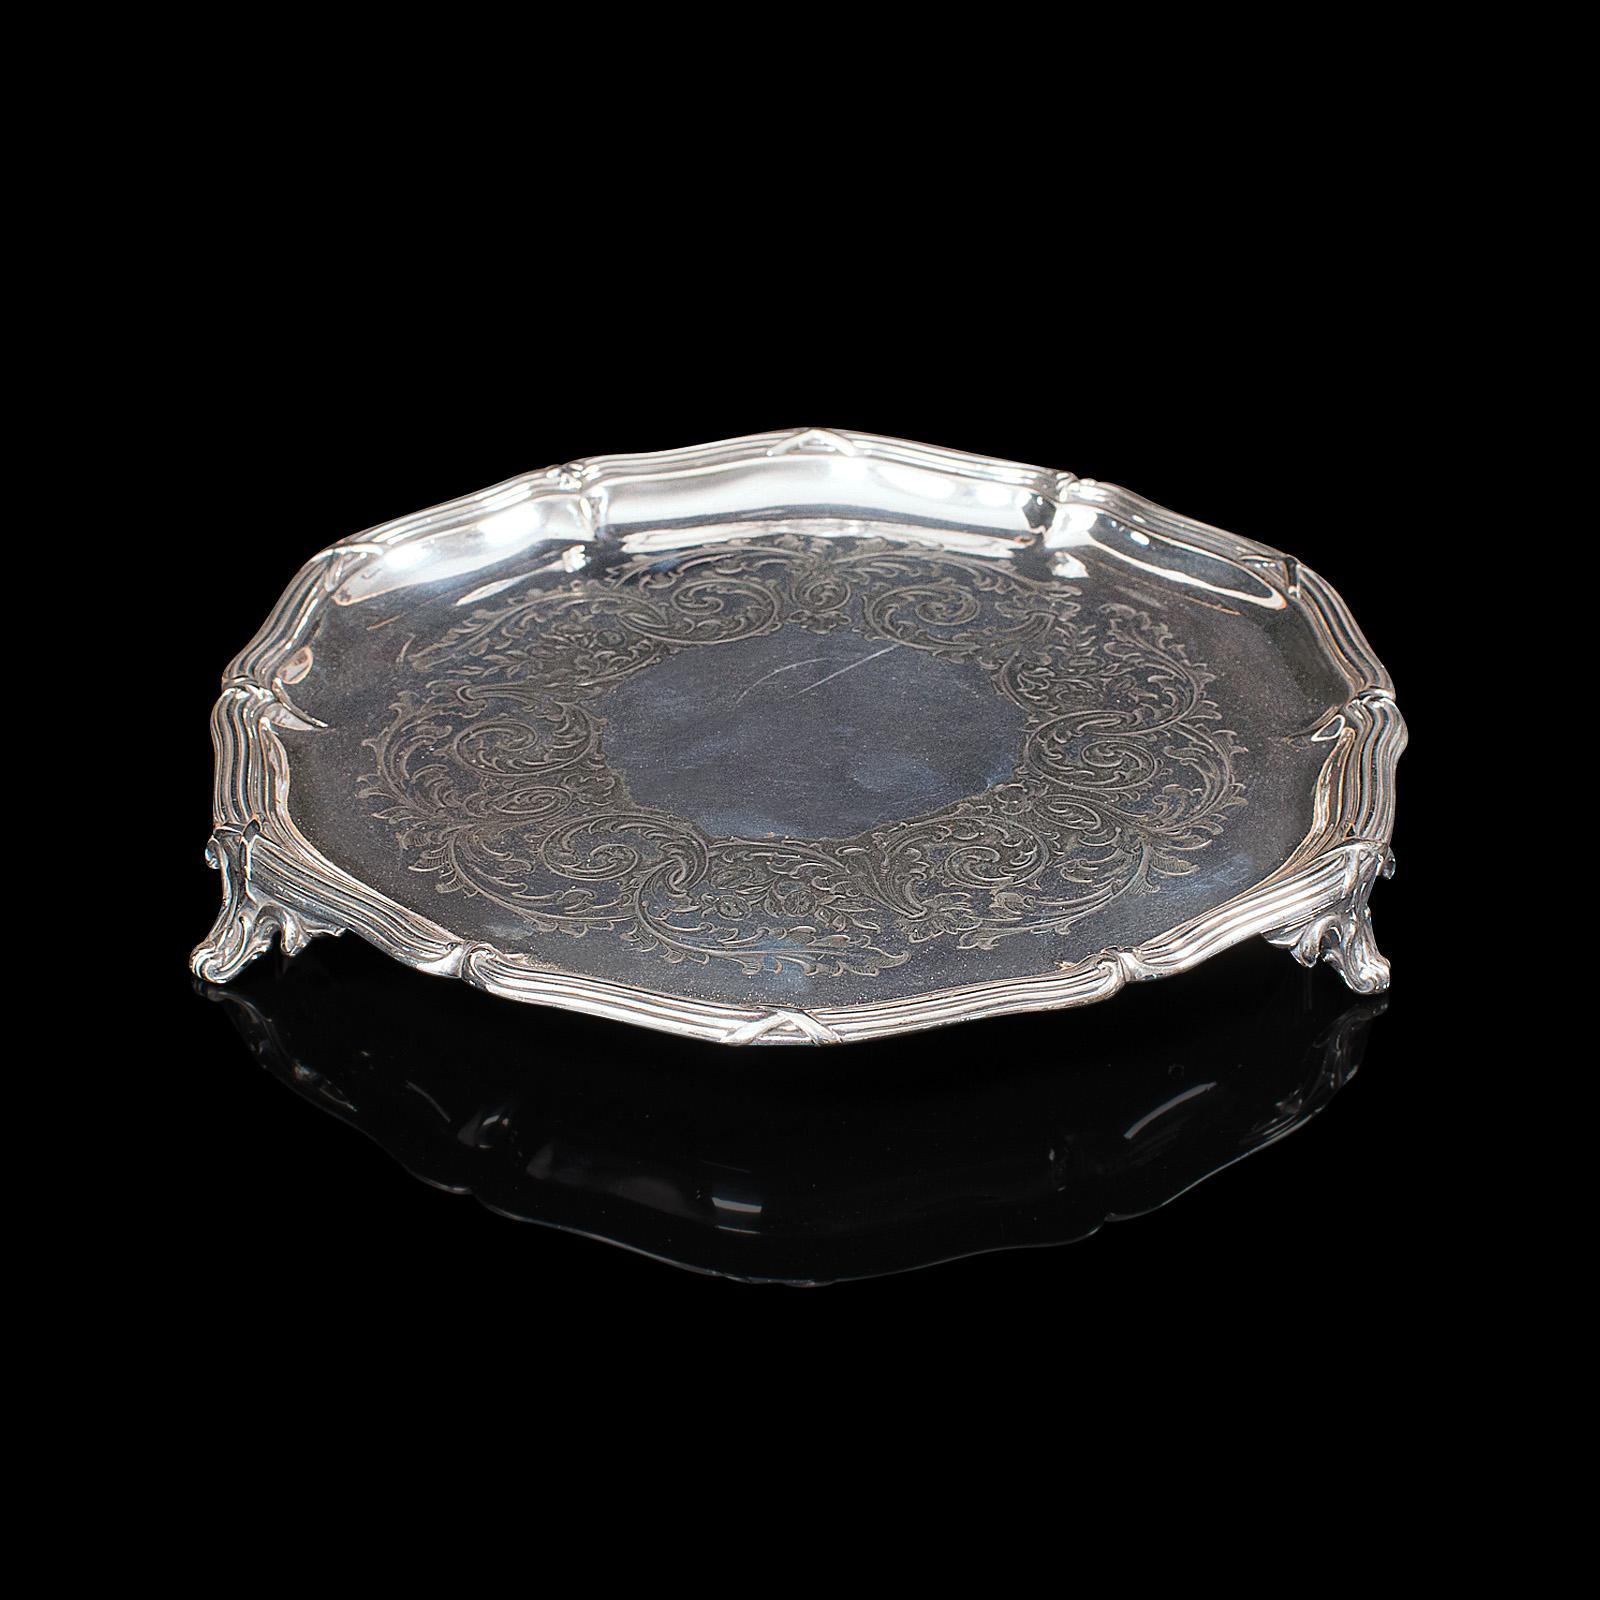 This is an antique decorative saucer. An English, silver plated dish by Thomas Bradbury & Sons, dating to the Victorian period, circa 1890.

Charming late 19th century decorative plate
Displays a desirable aged patina - some historical